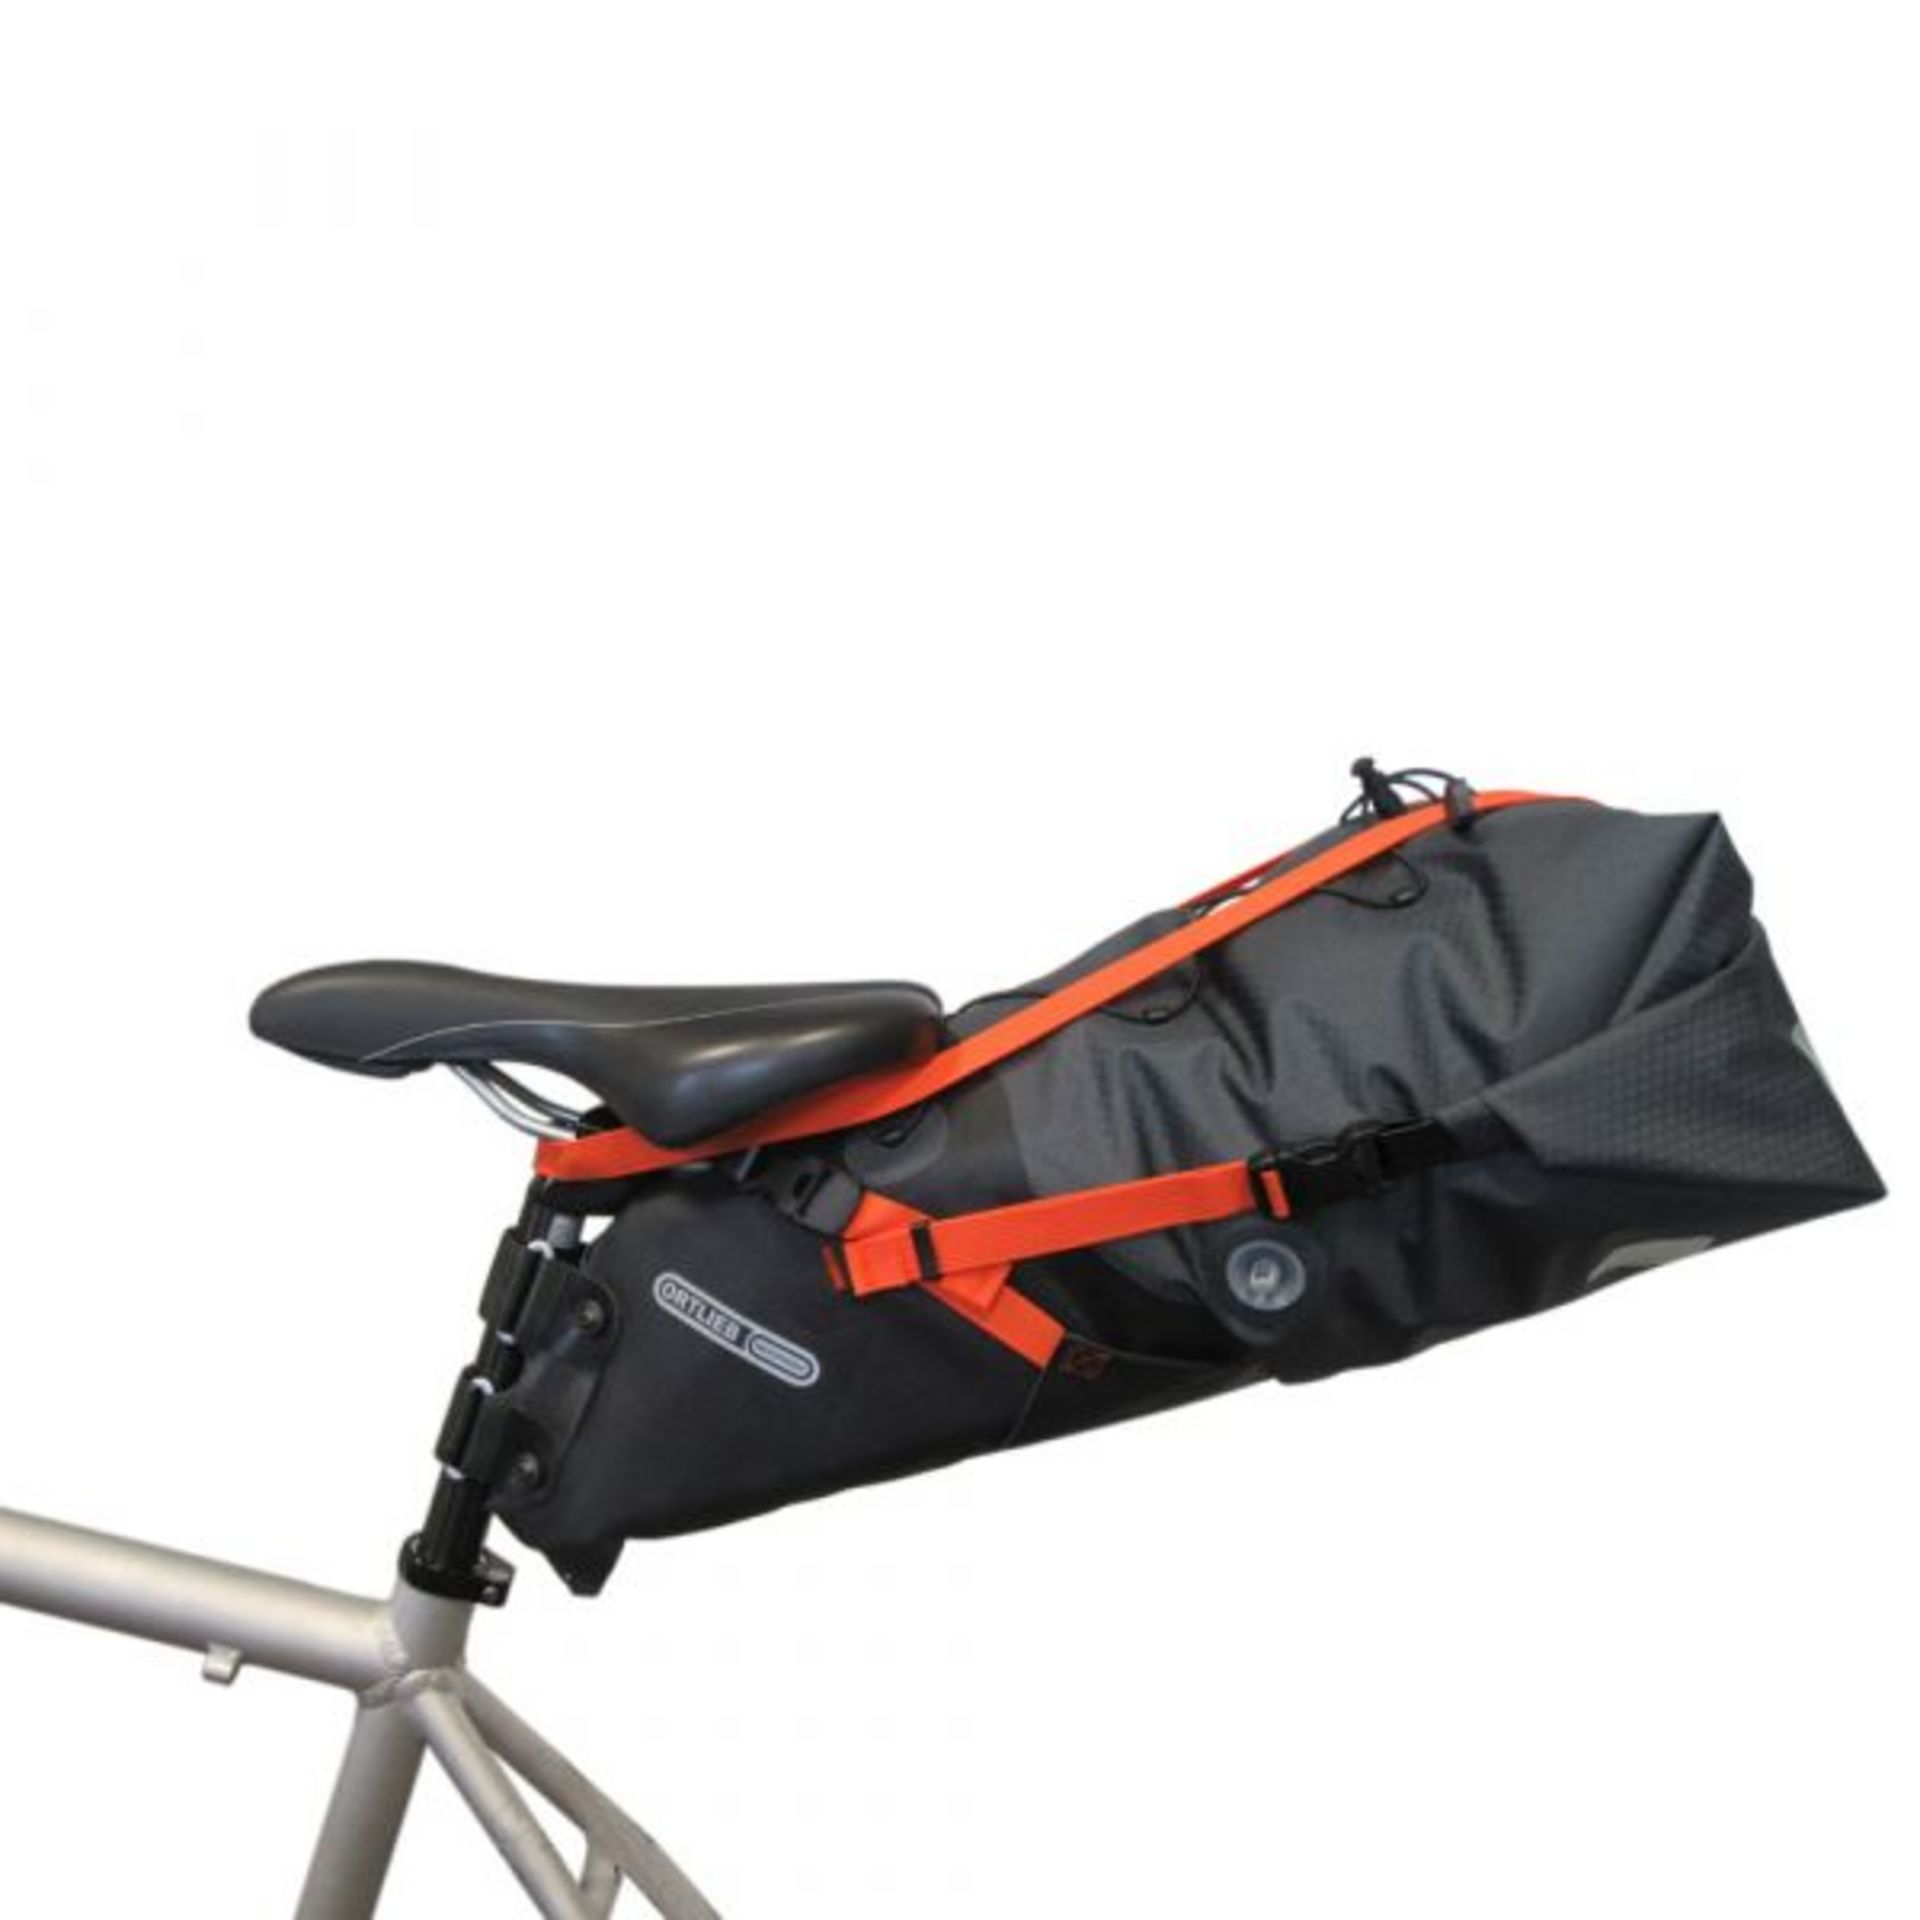 ORTLIEB Fixing Strap Seatpack